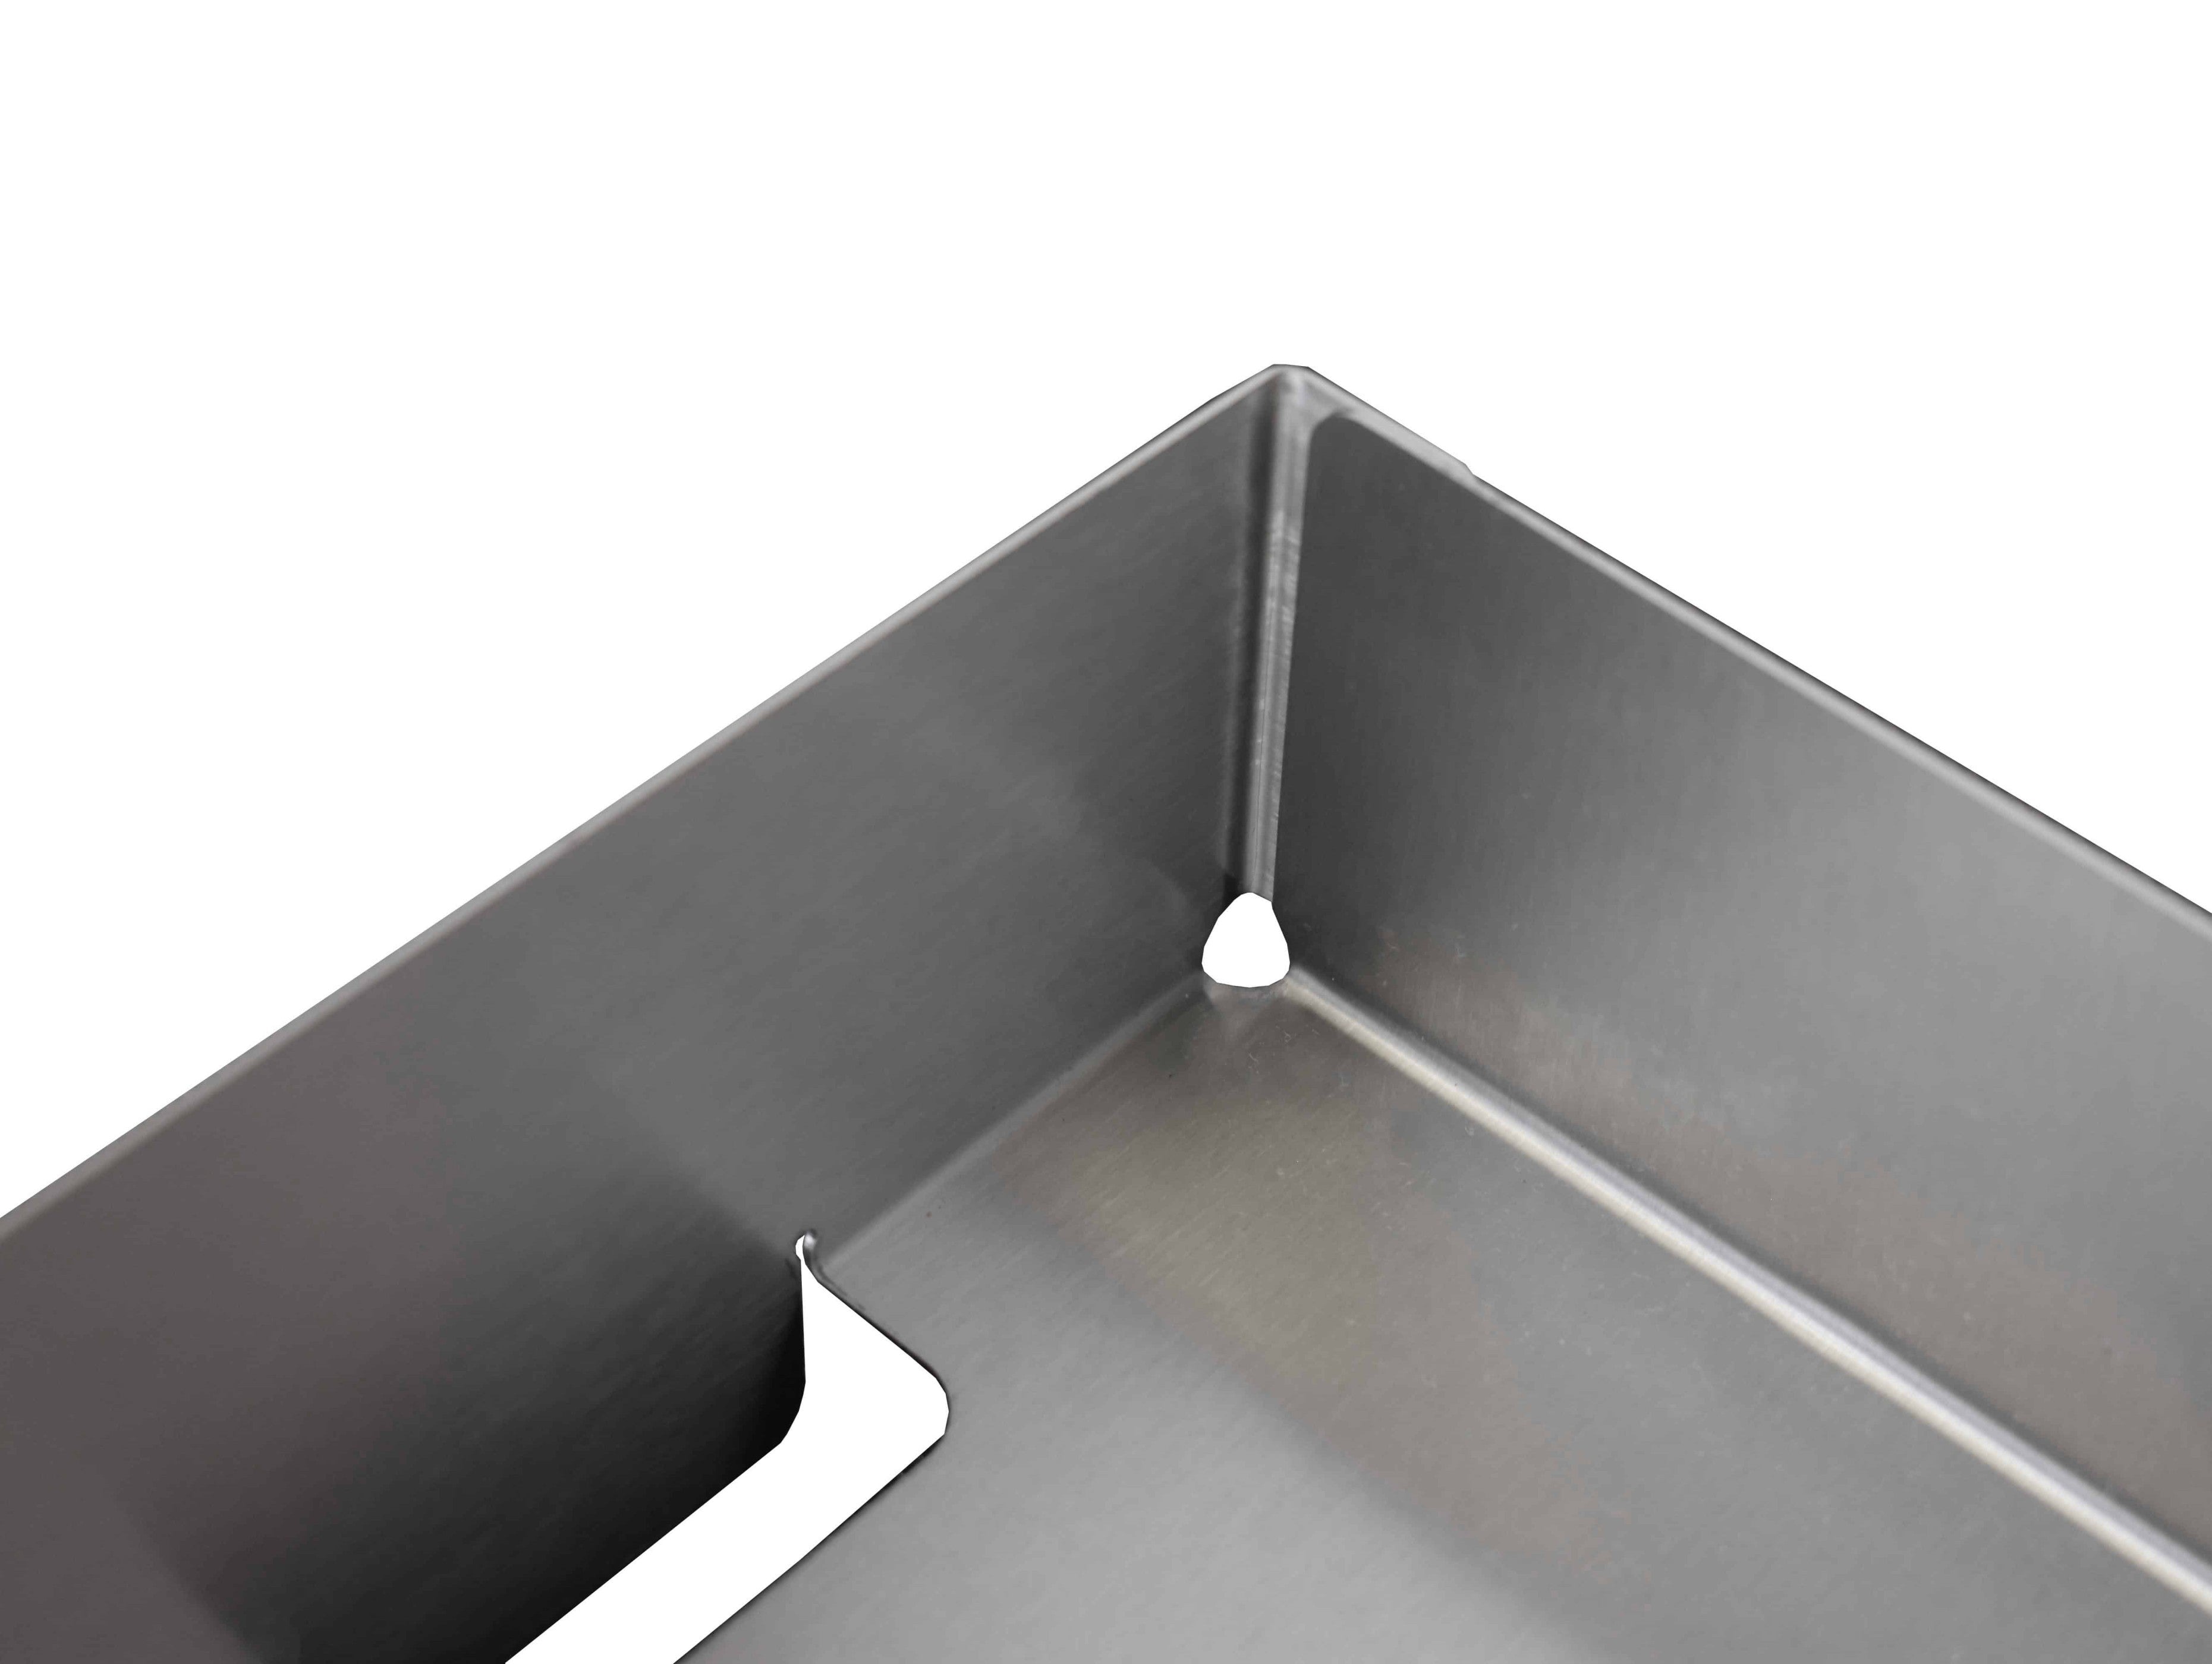 Stainless steel A4 document tray